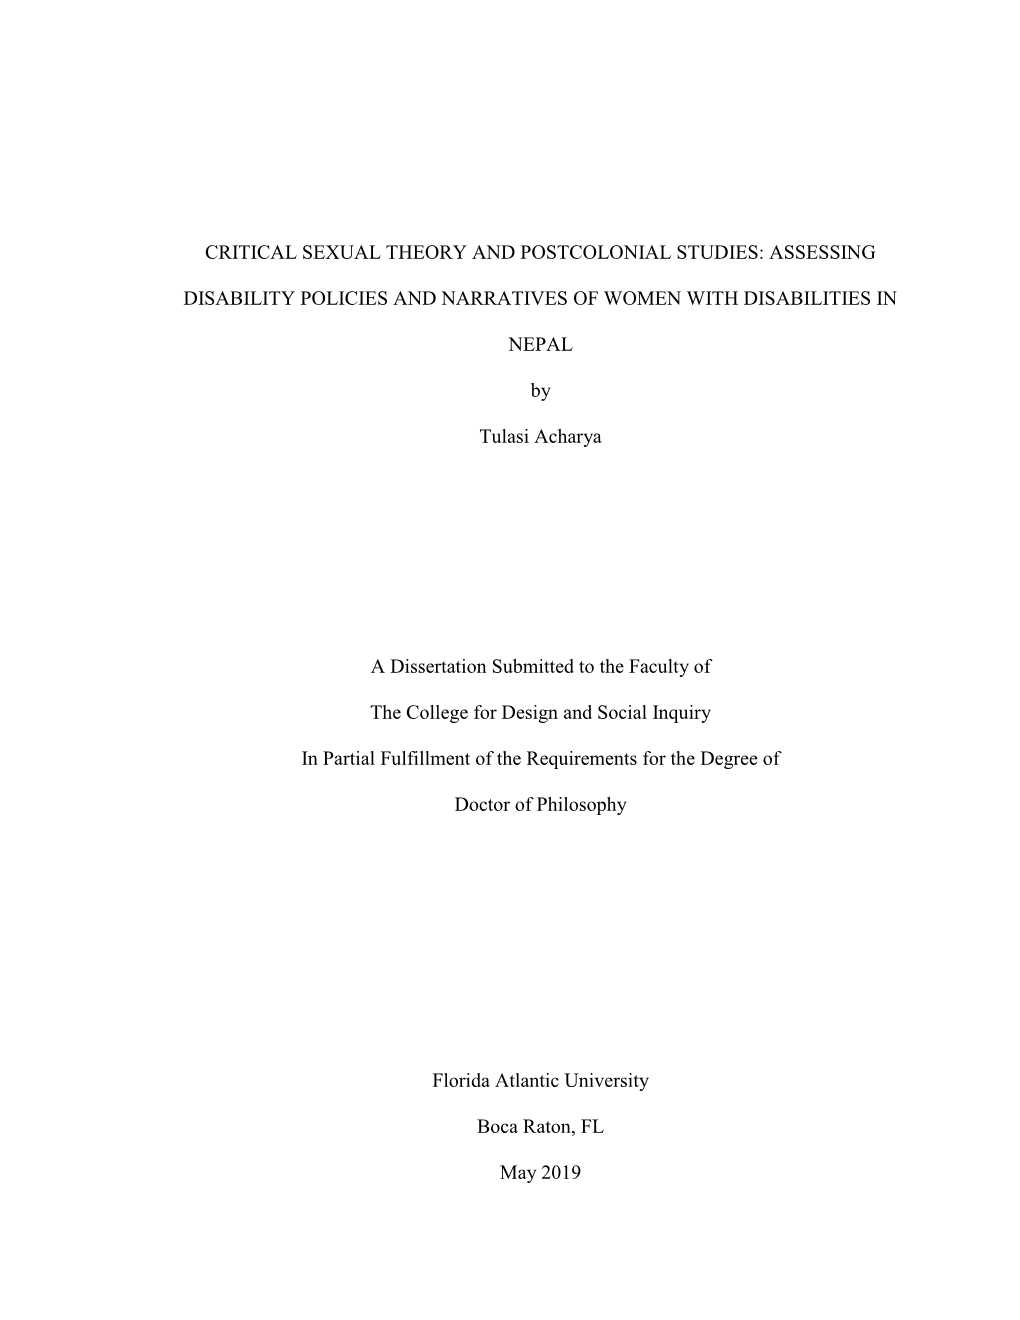 Critical Sexual Theory and Postcolonial Studies: Assessing